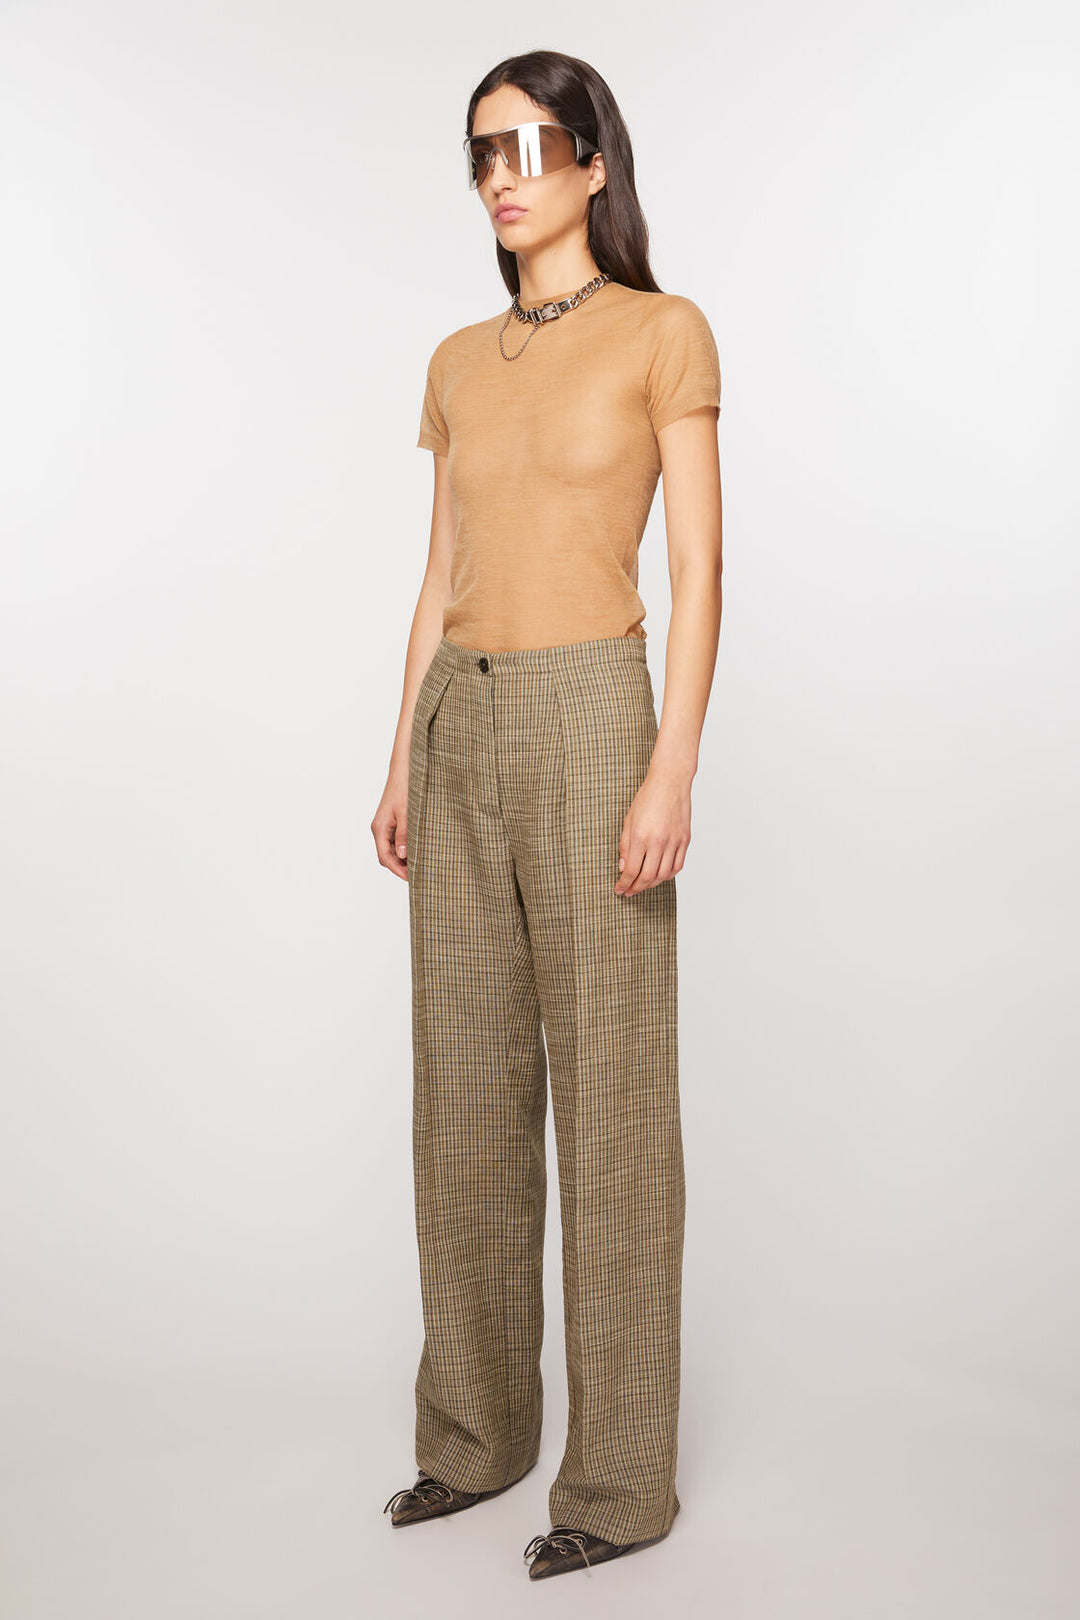 ACNE STUDIOS - Tailored Linen Blend Trousers - Multi Brown - Dale